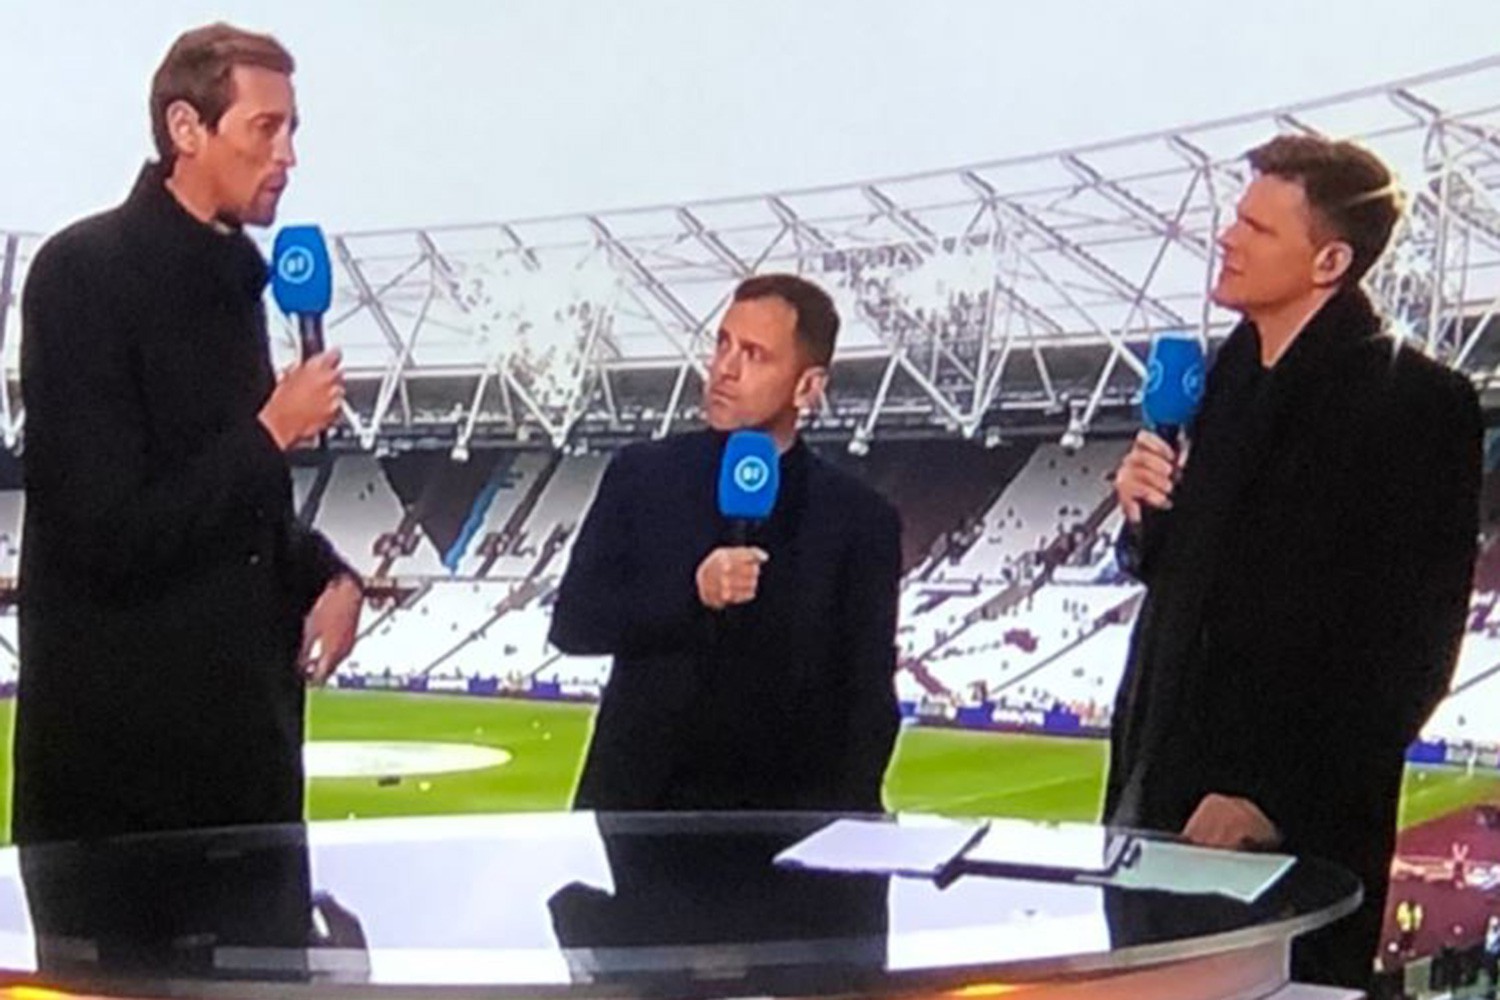 Peter Crouch had viewers in hysterics as as he loomed over fellow BT Sport pundit Joe Cole